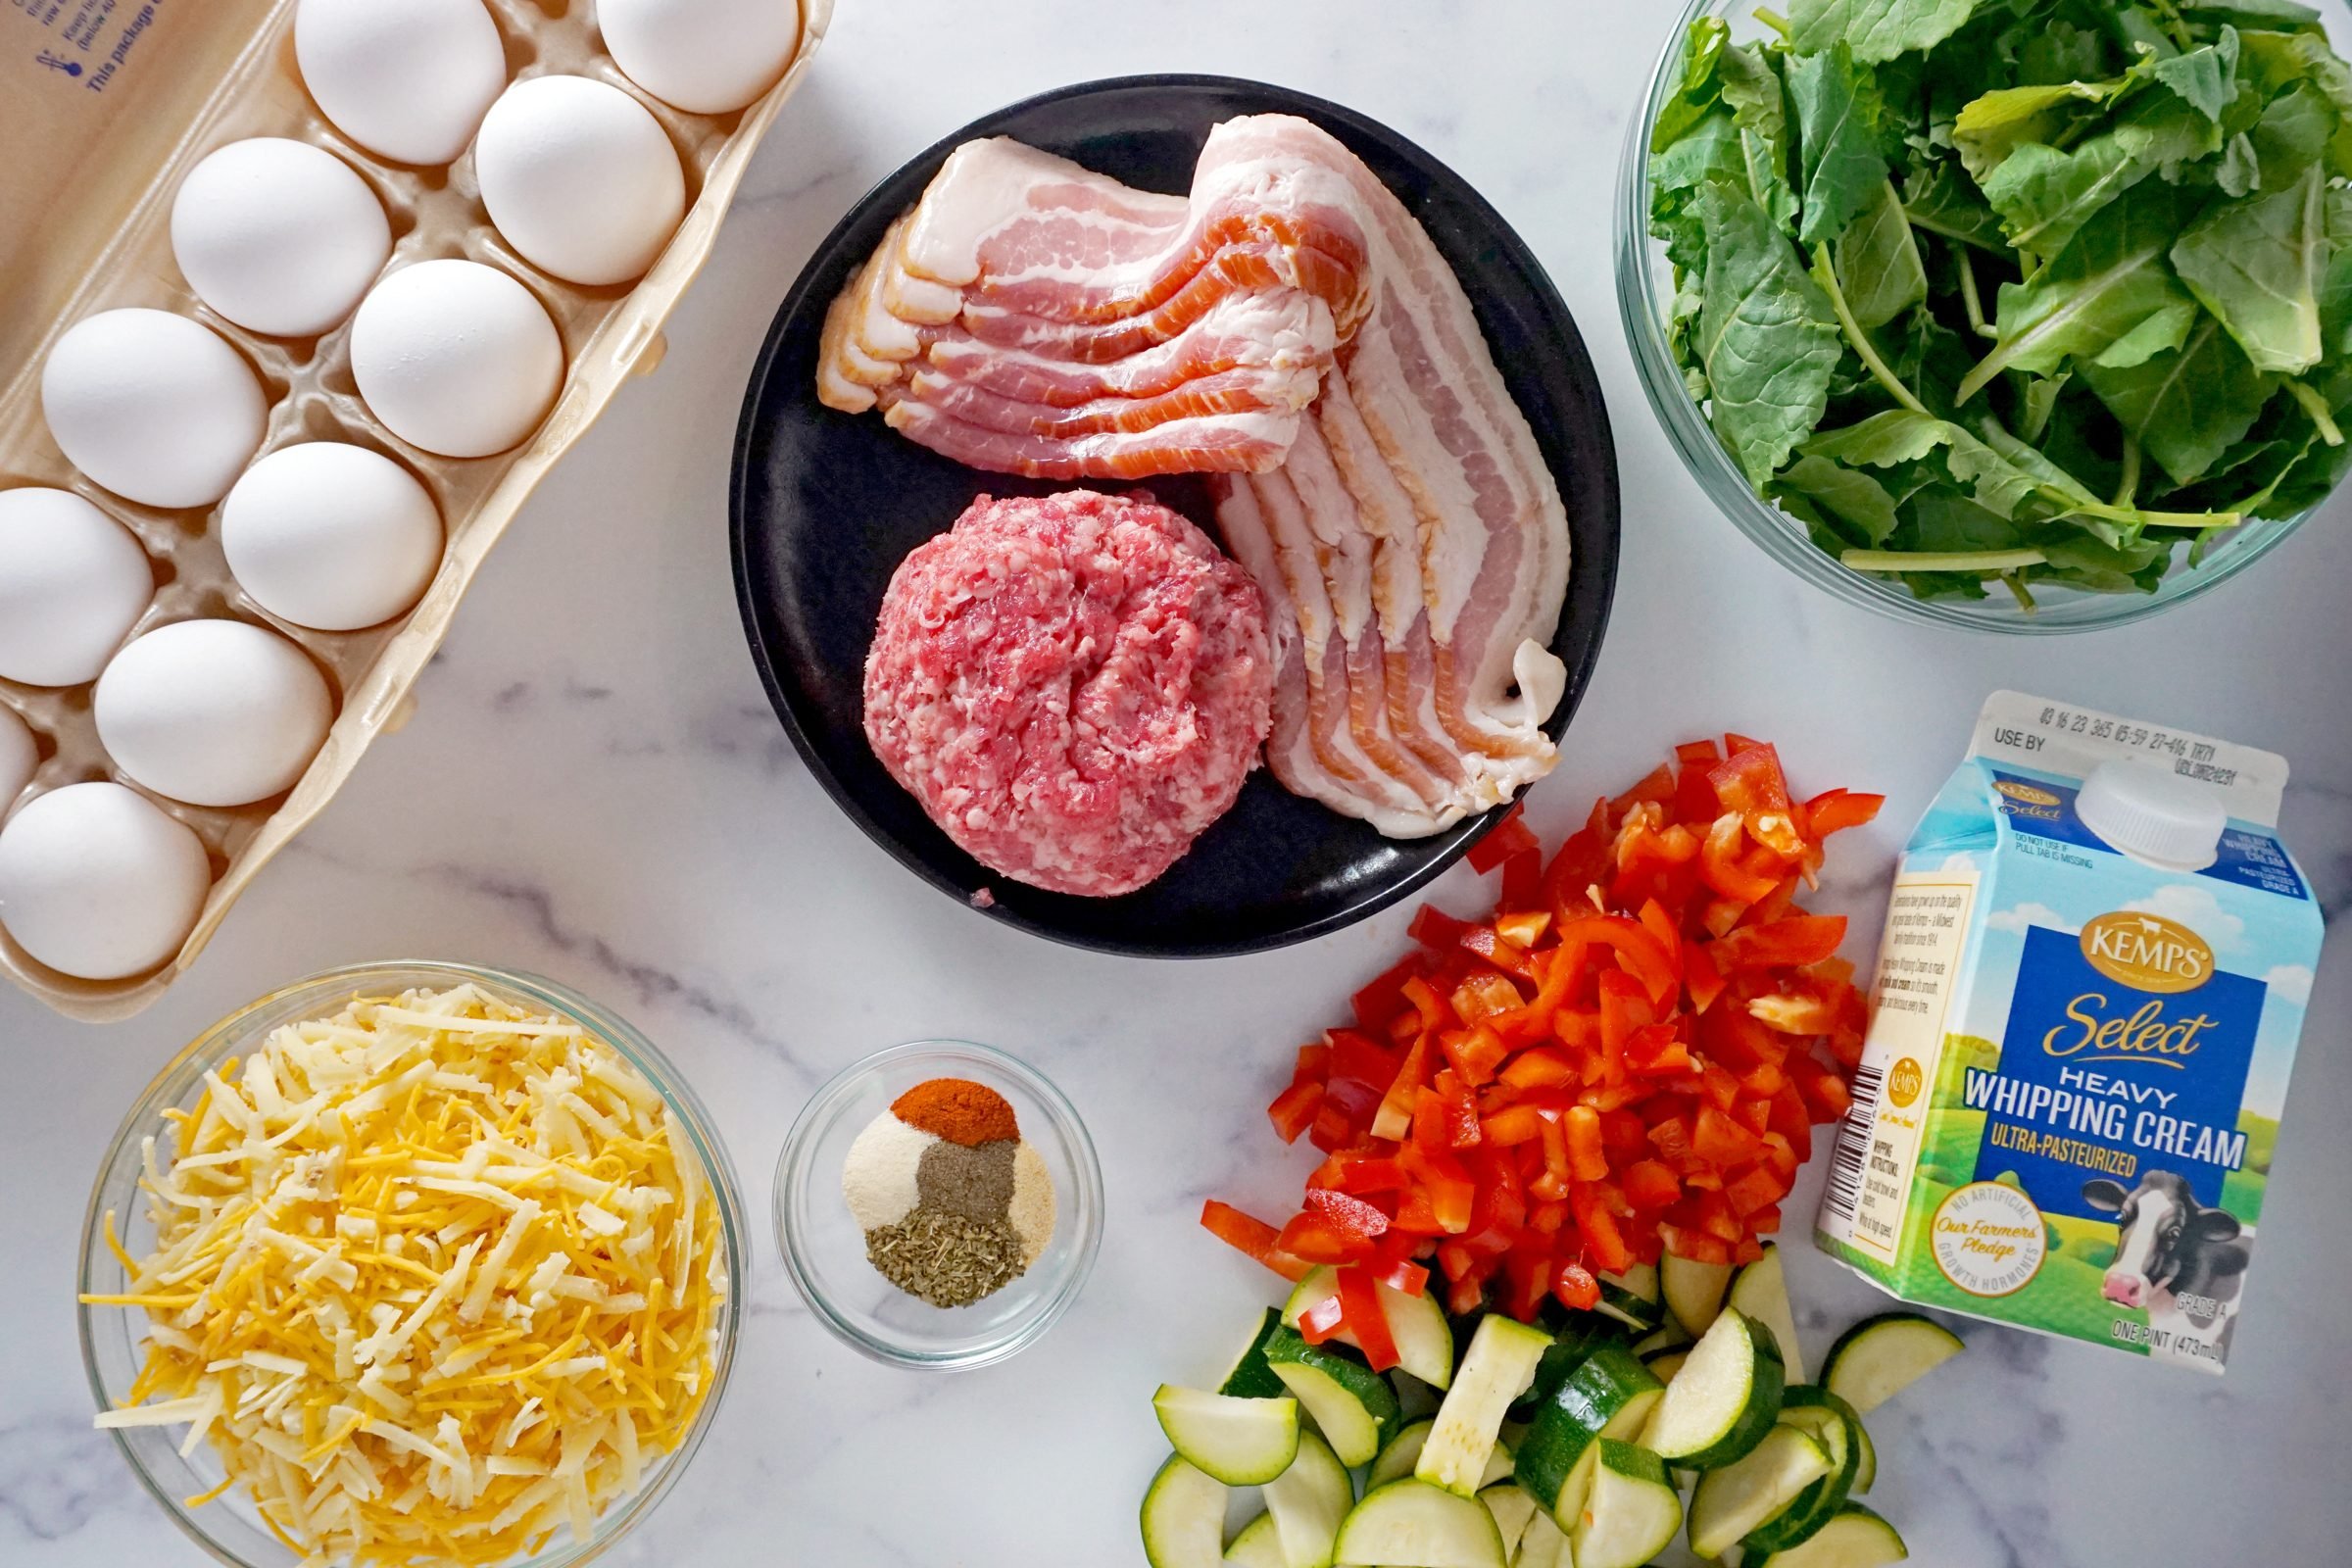 Ingredients for a keto breakfast on a kitchen counter